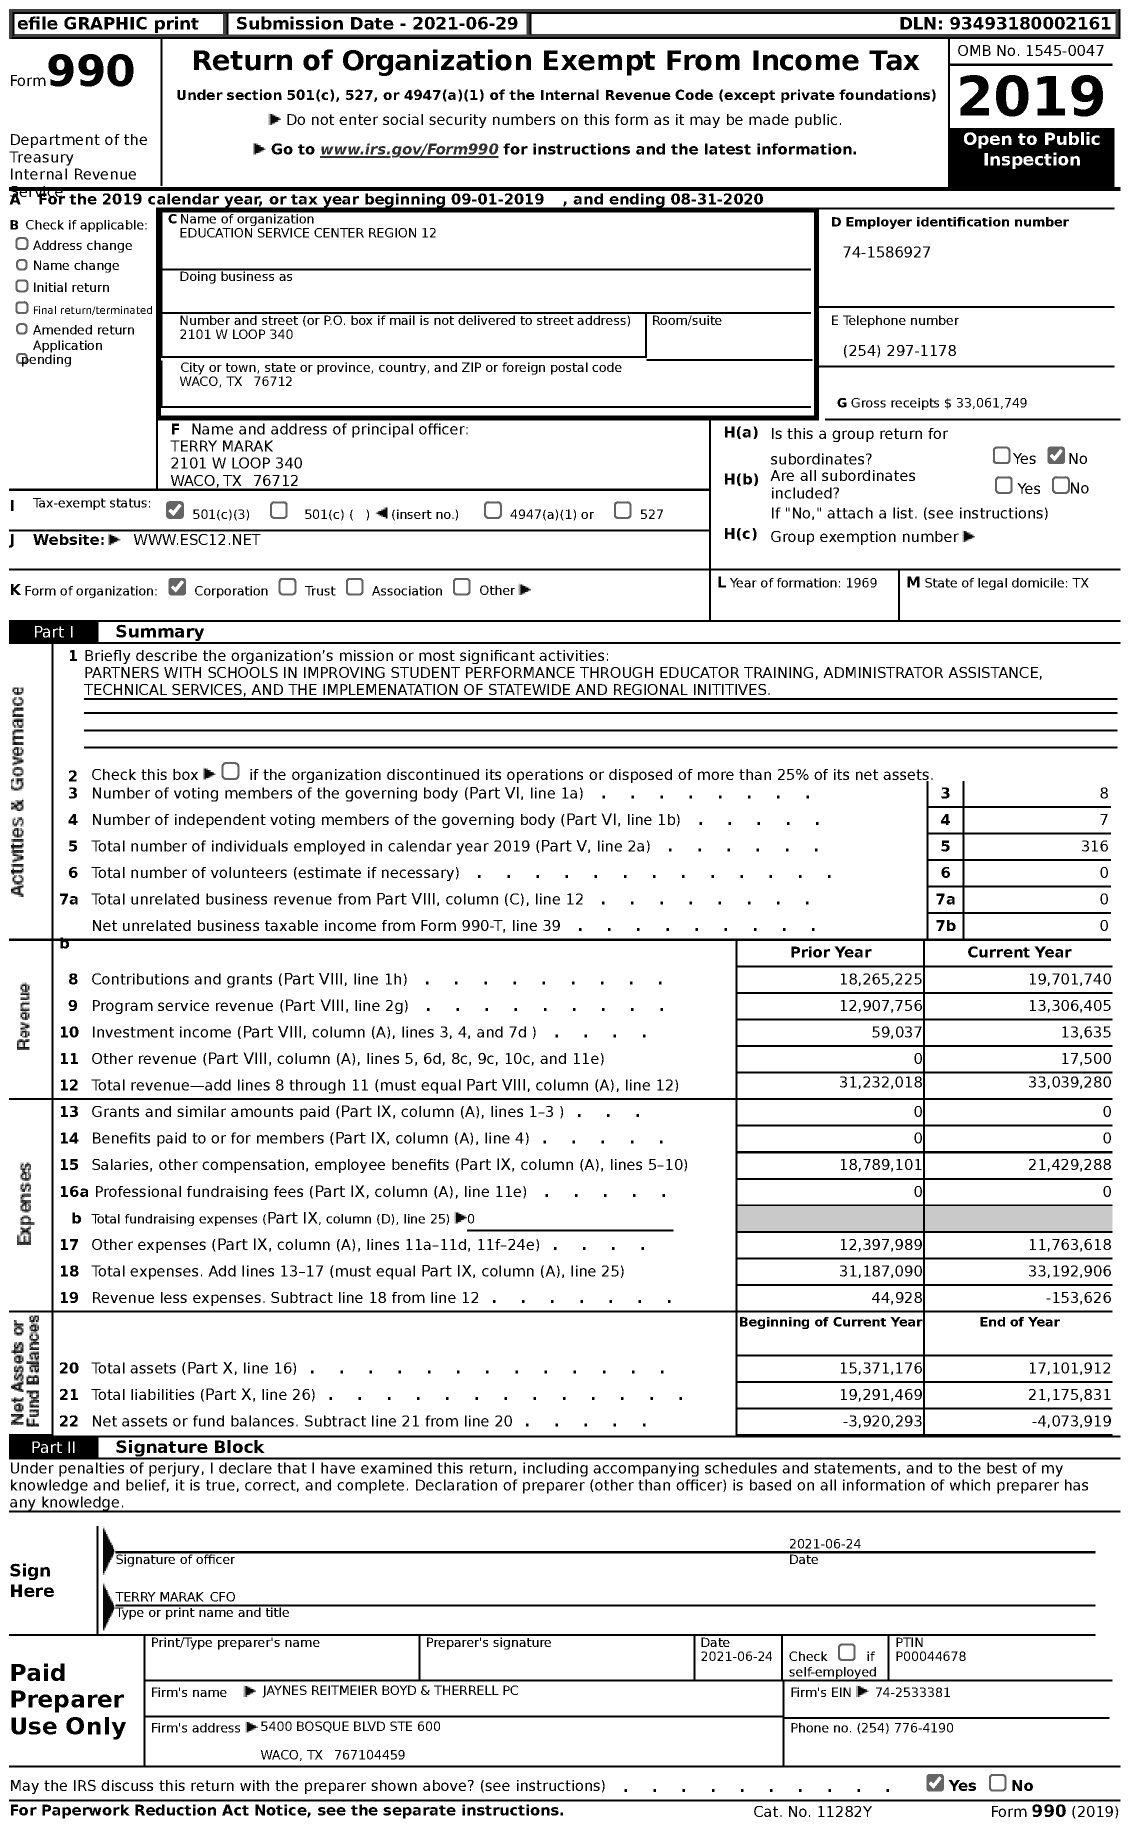 Image of first page of 2019 Form 990 for Education Service Center Region 12 (ESC Region 12)